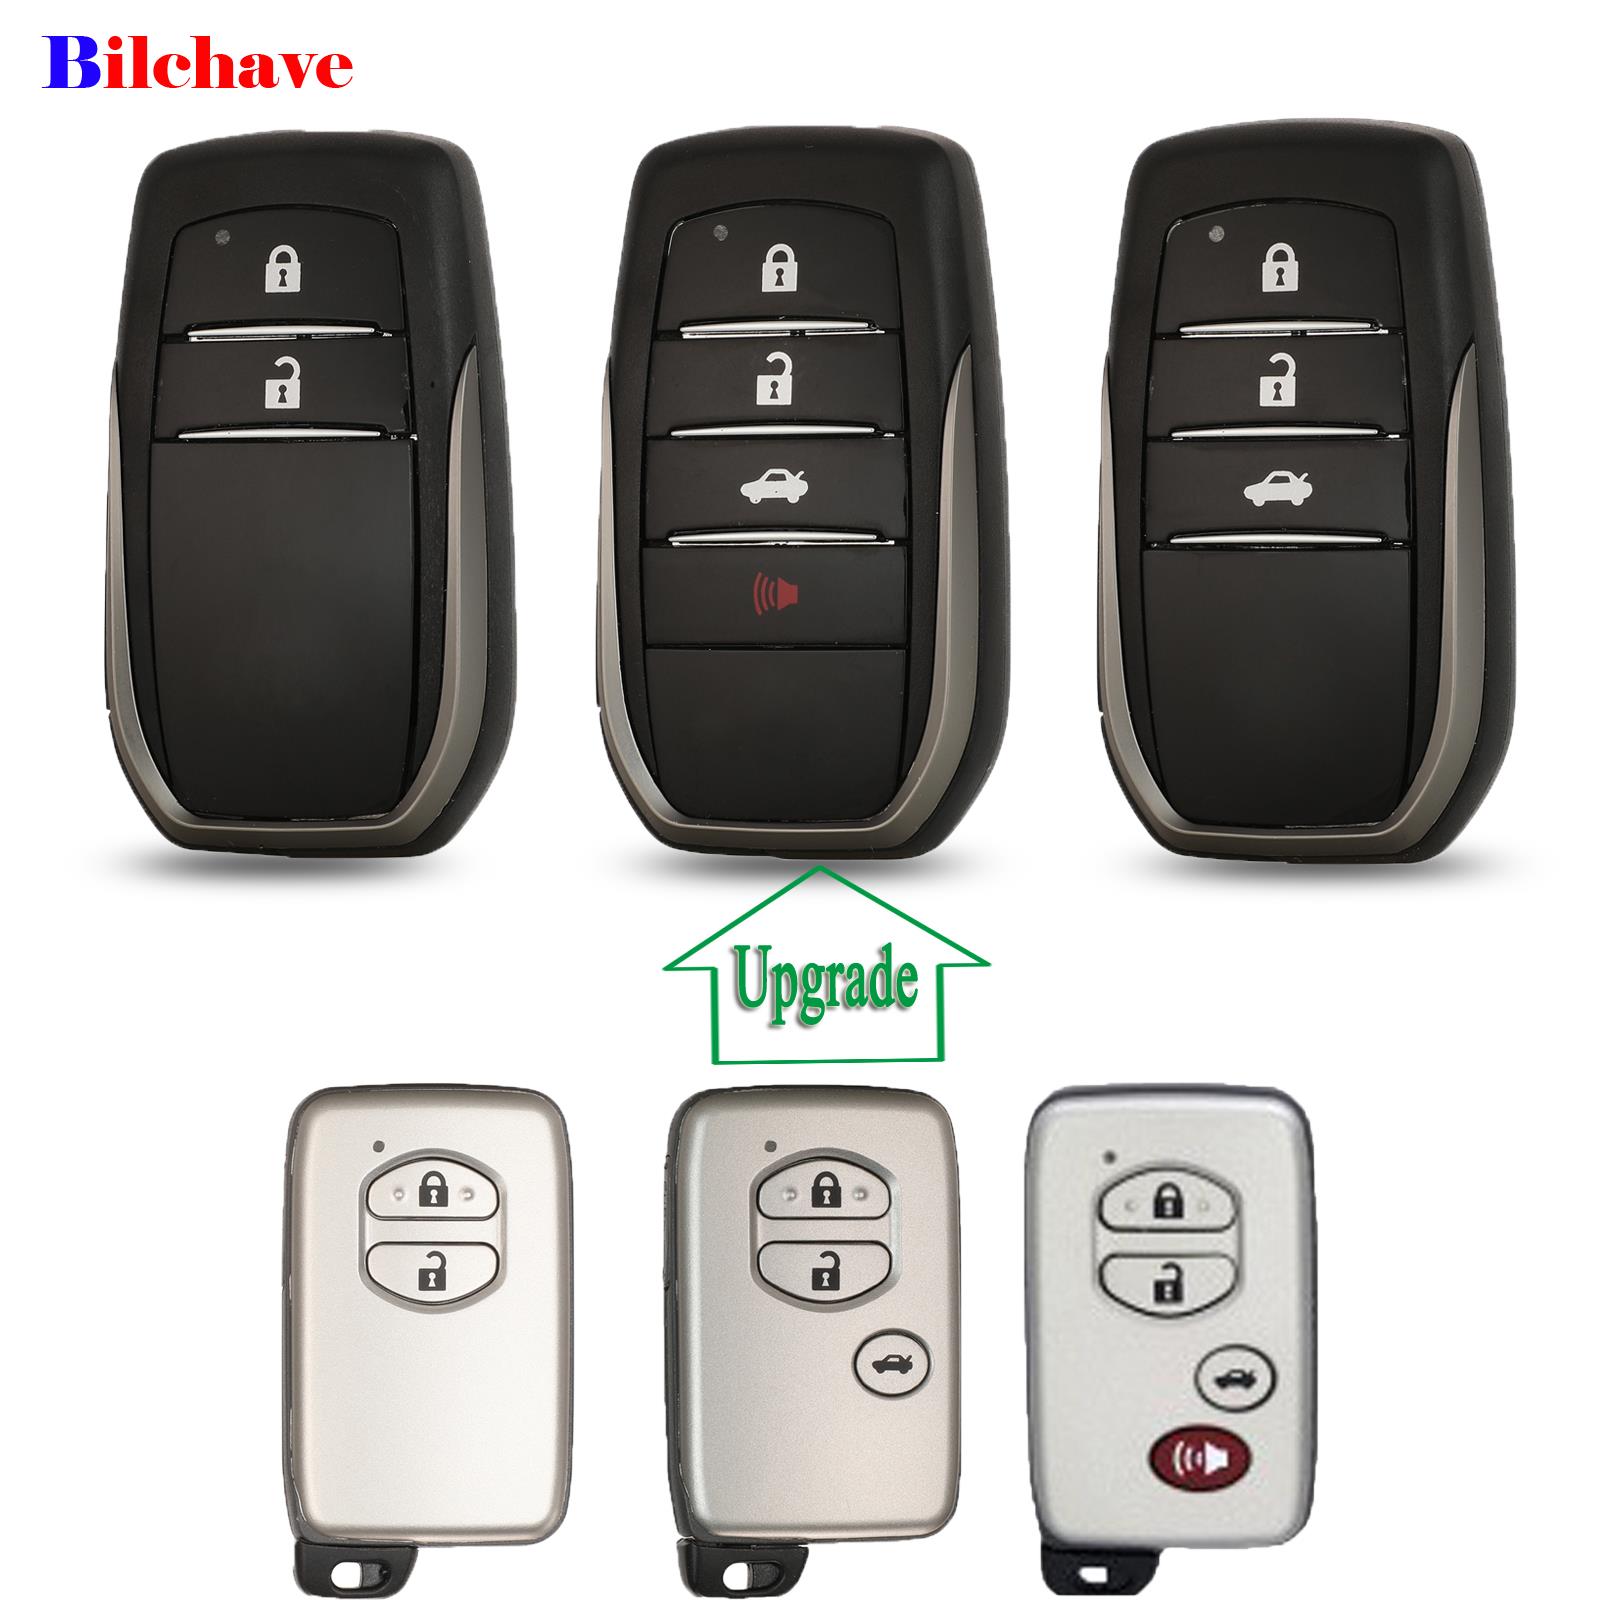 Bilchave Aangepast Voor Toyota C-Hr Land Cruiser 200 Avensis Auris Corolla Fob Remote Smart Autosleutel Shell Case 2/3/4 Knoppen Toy48